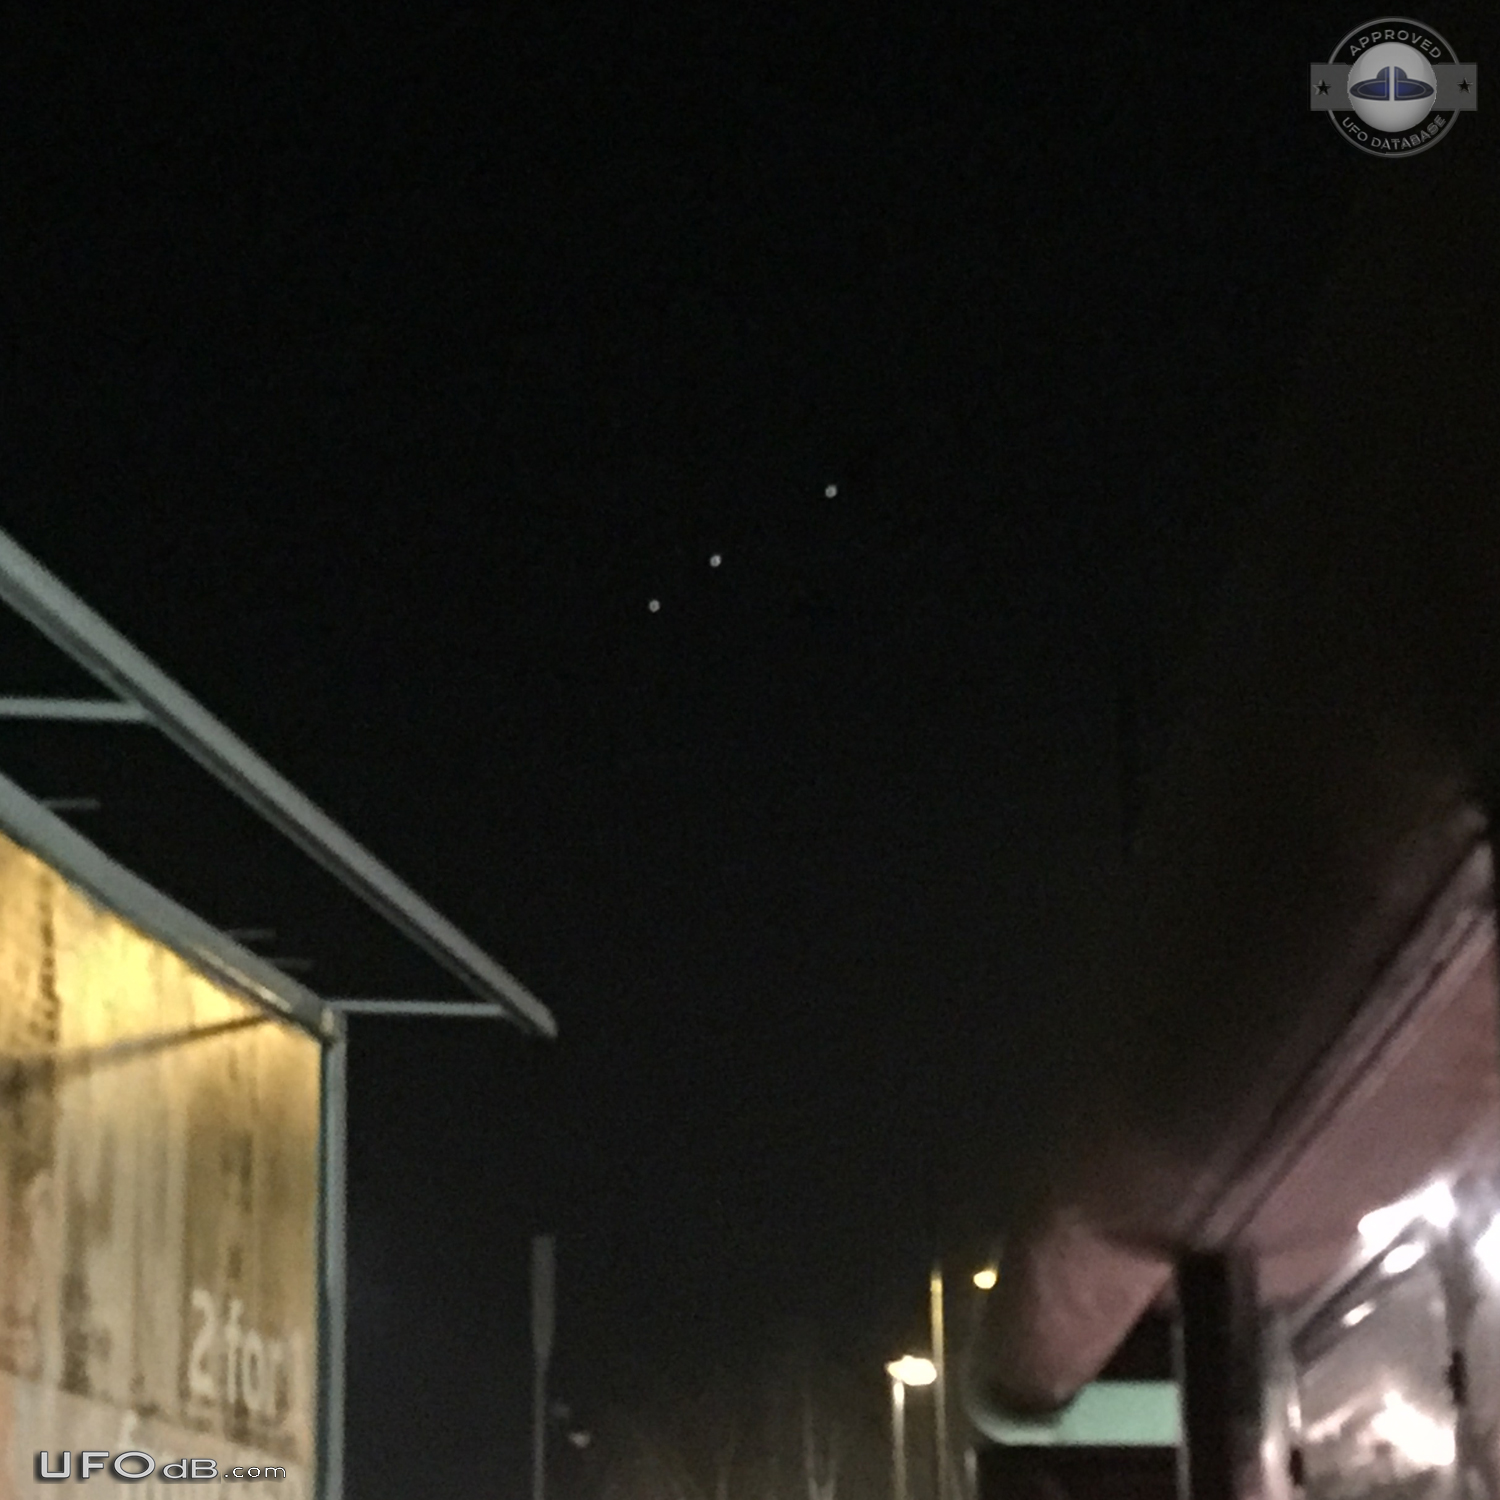 3 large orange red colored spheres UFOs Romford London England 2016 UFO Picture #793-4